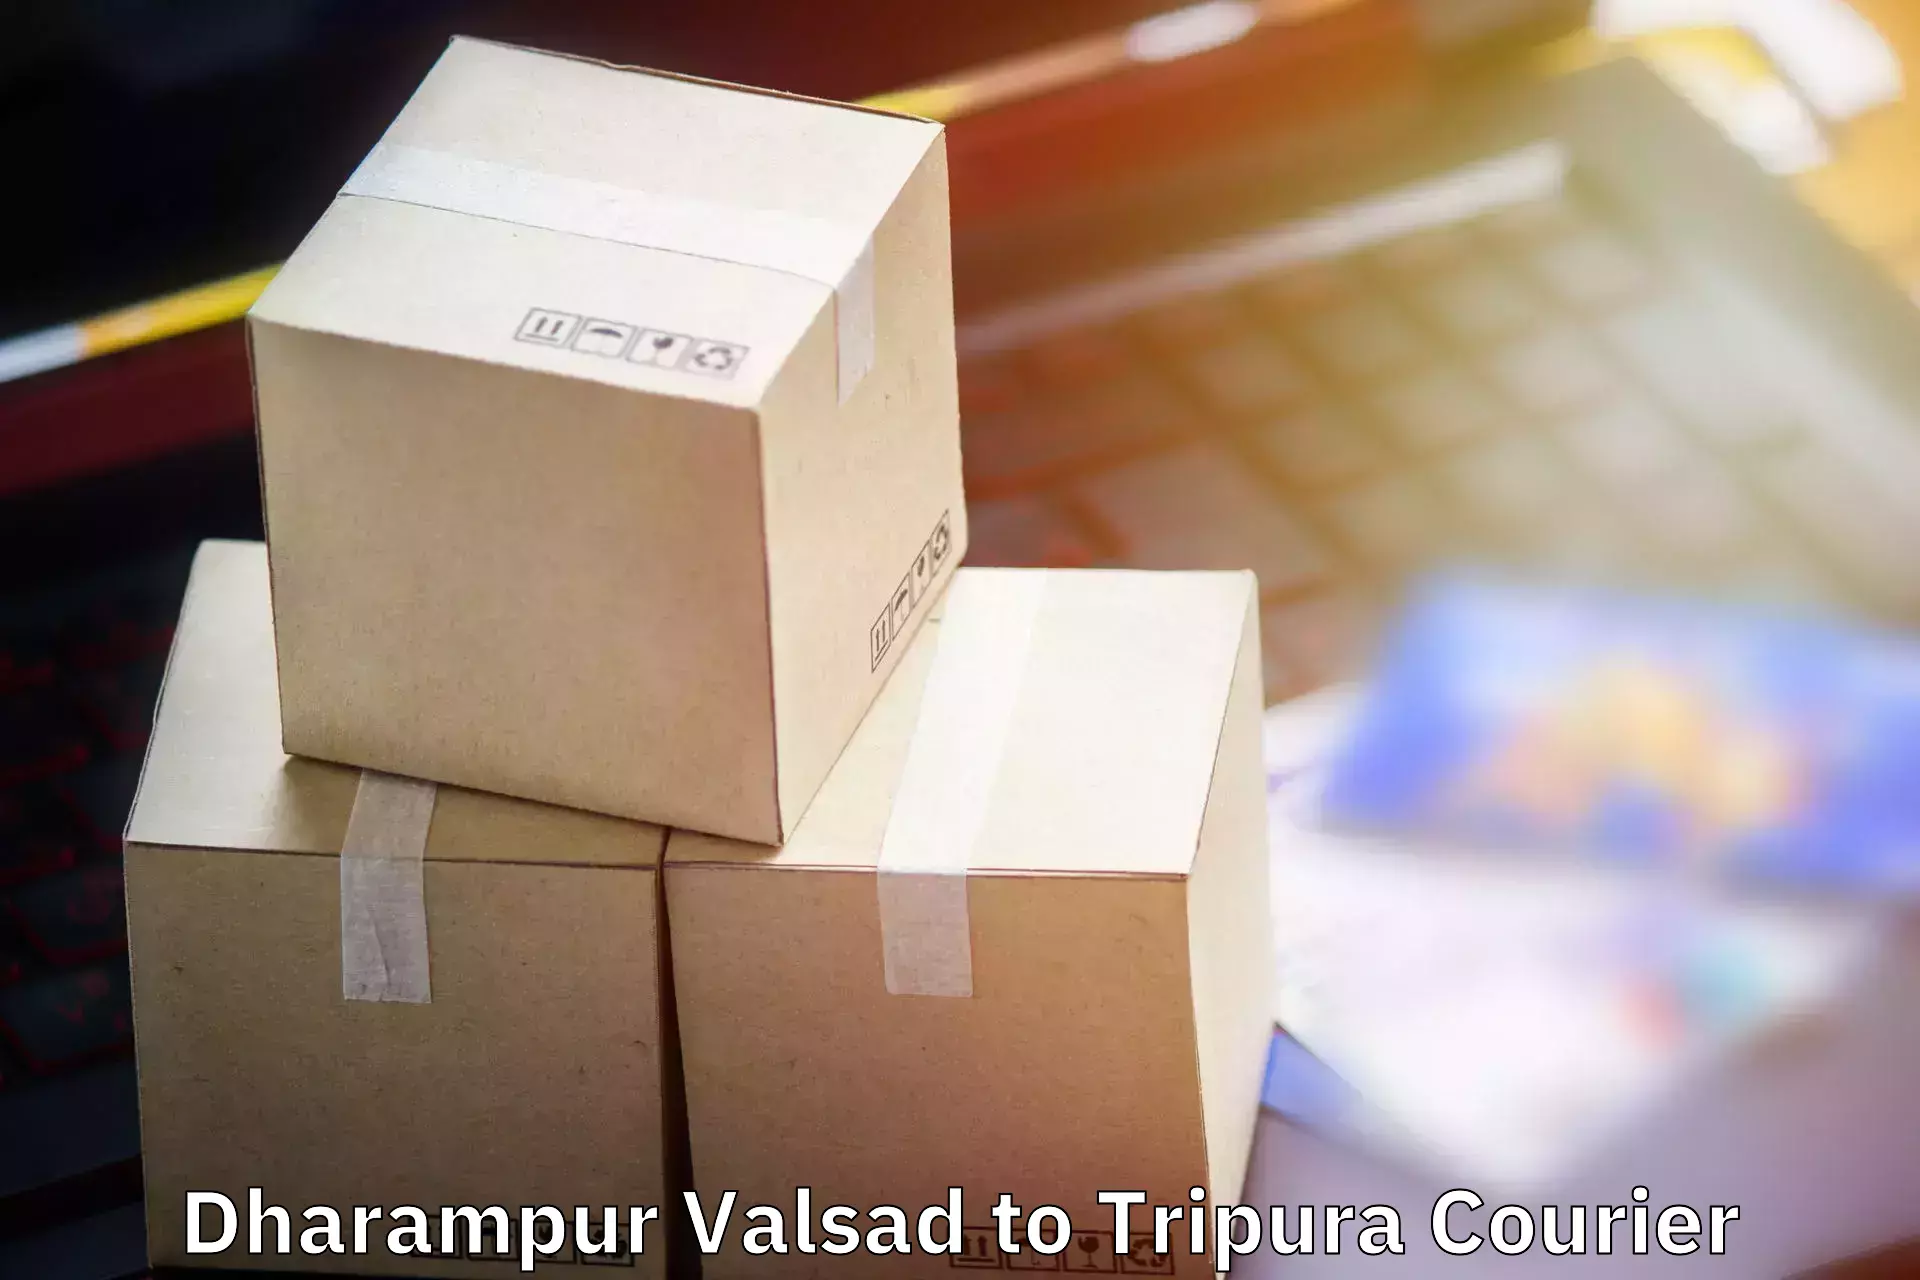 Luggage delivery estimate Dharampur Valsad to Tripura